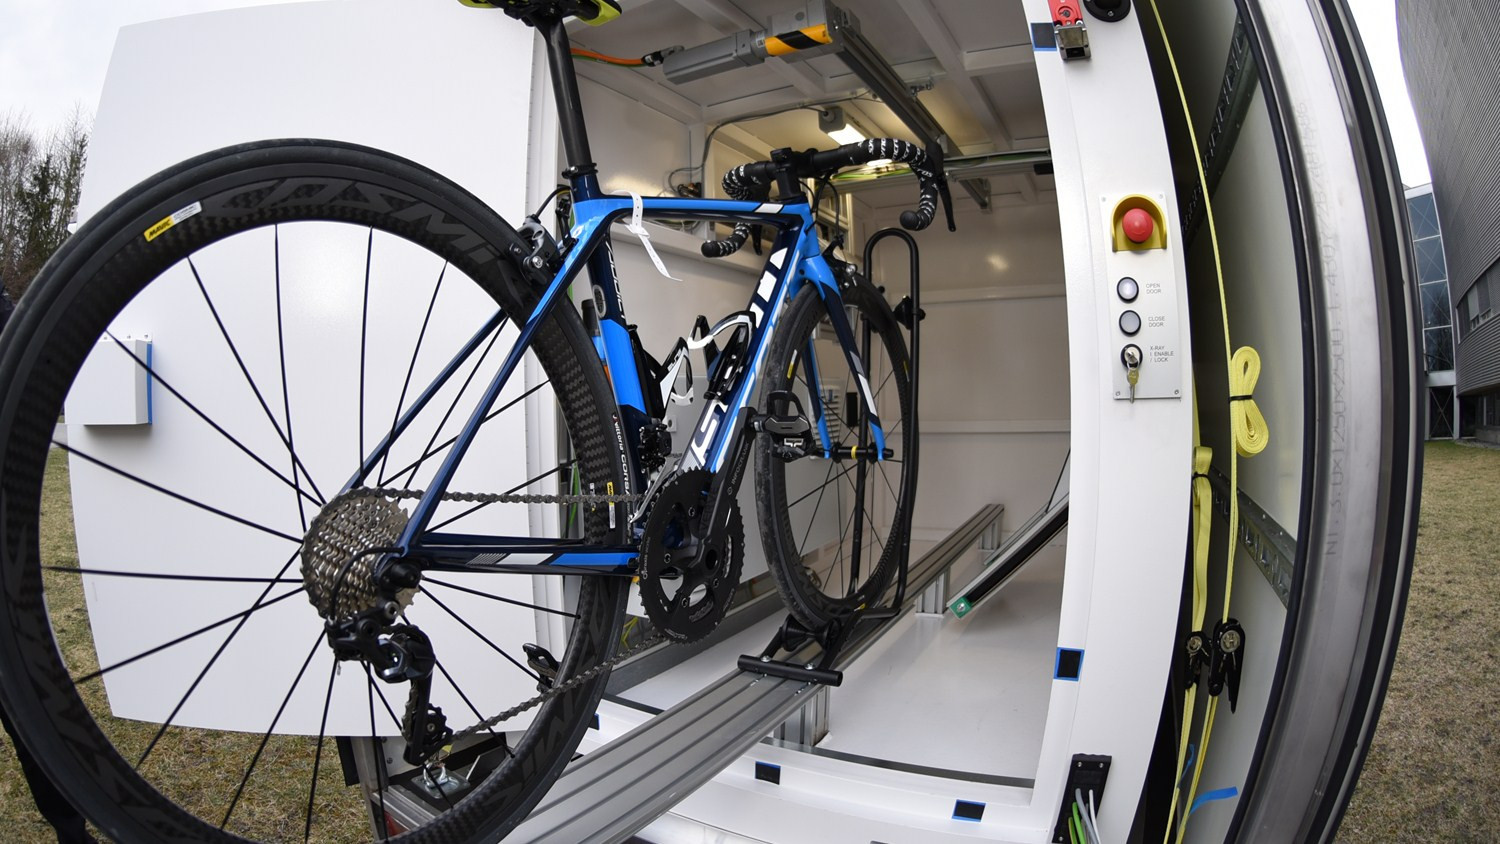 Mobile x-ray unit unveiled by UCI in bid to combat threat of technological fraud